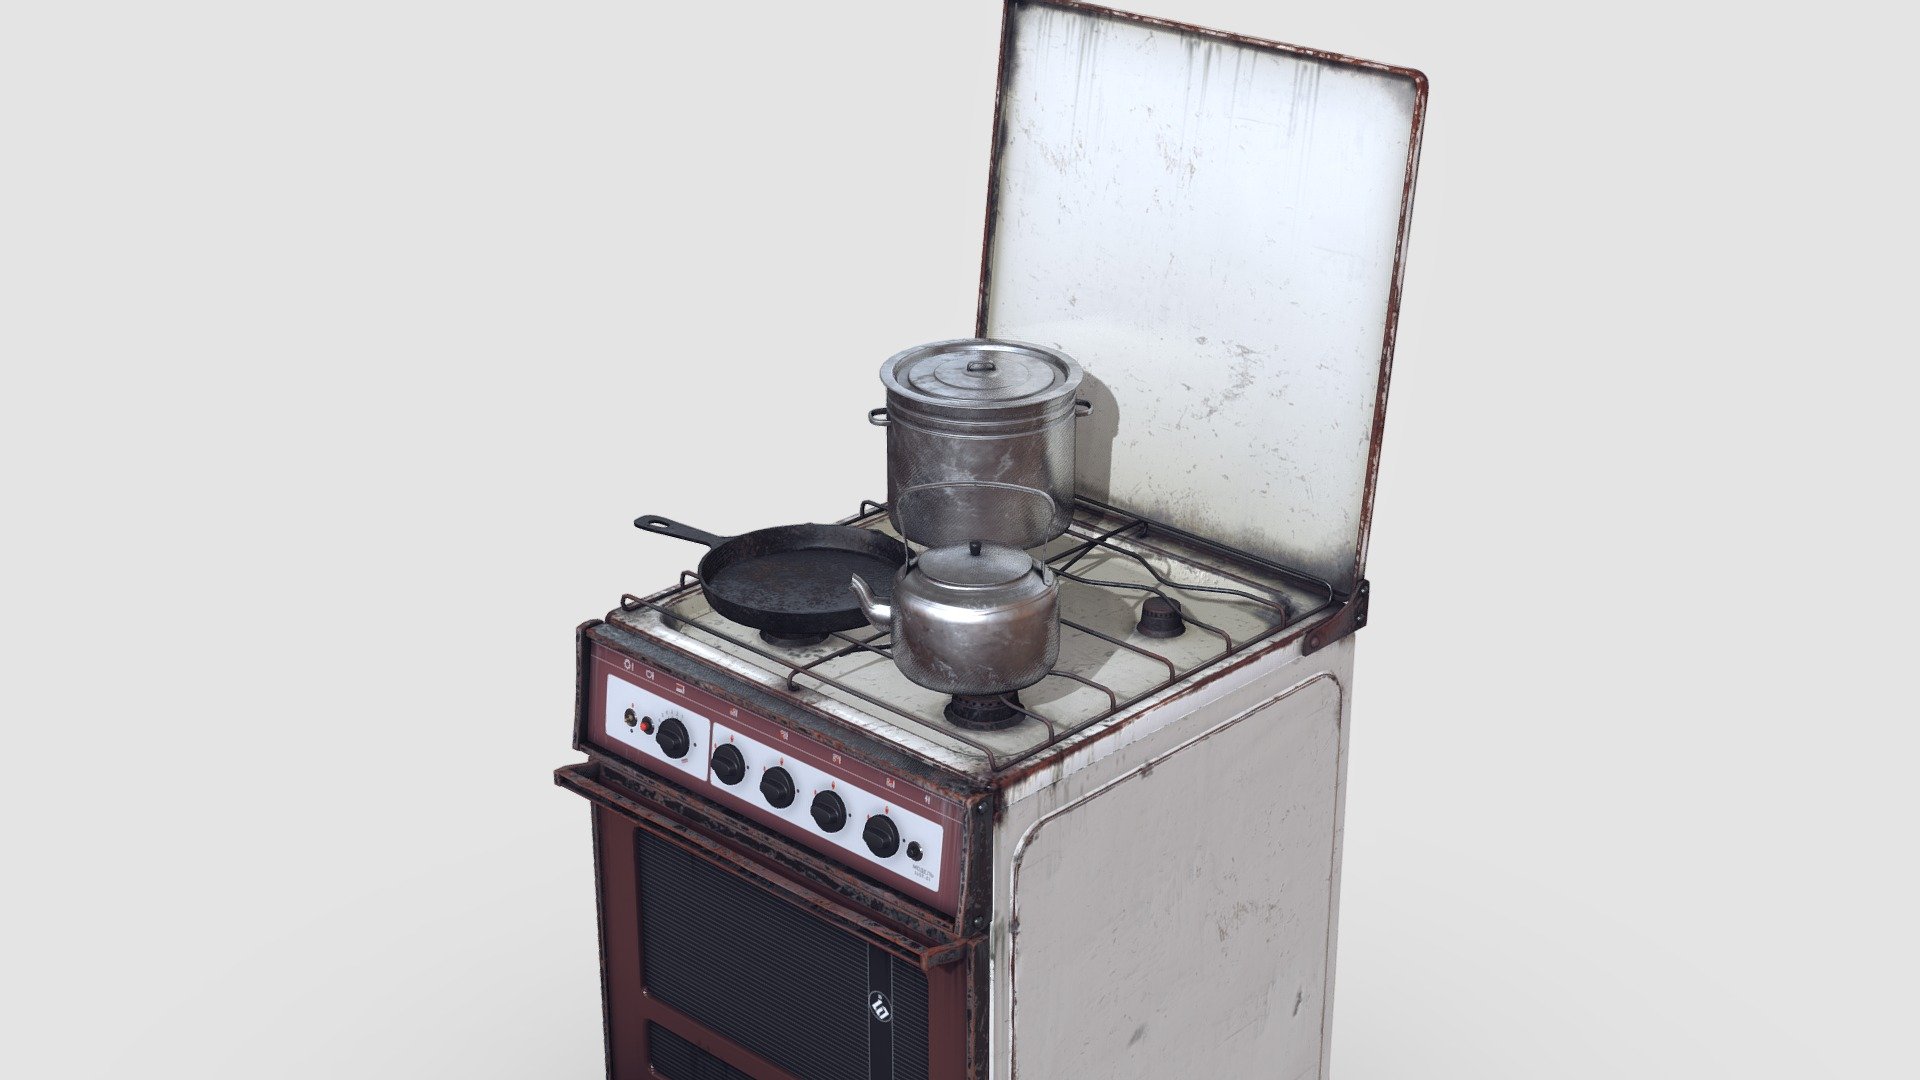 https://www.youtube.com/watch?v=R1XzOnuaEOg - speed modeling
https://www.youtube.com/watch?v=6JGXifsOUkg - speed texturing - Old Soviet Russia Cooker - 3D model by seenoise 3d model